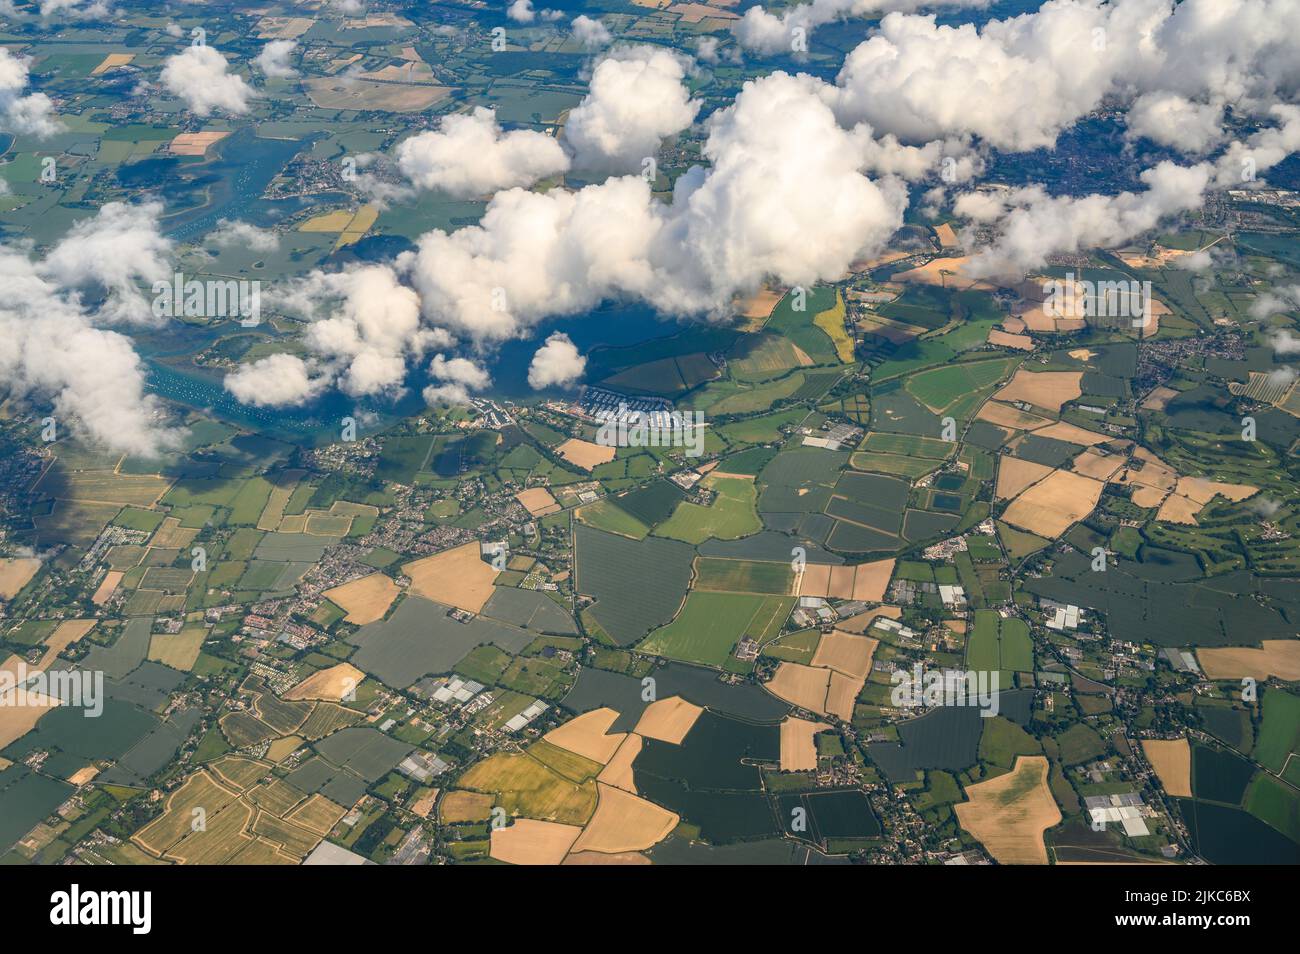 Aerial view over West Sussex countryside and Chichester Harbour, in good weather with a white cumulus clouds photographed from a passenger jet. Stock Photo